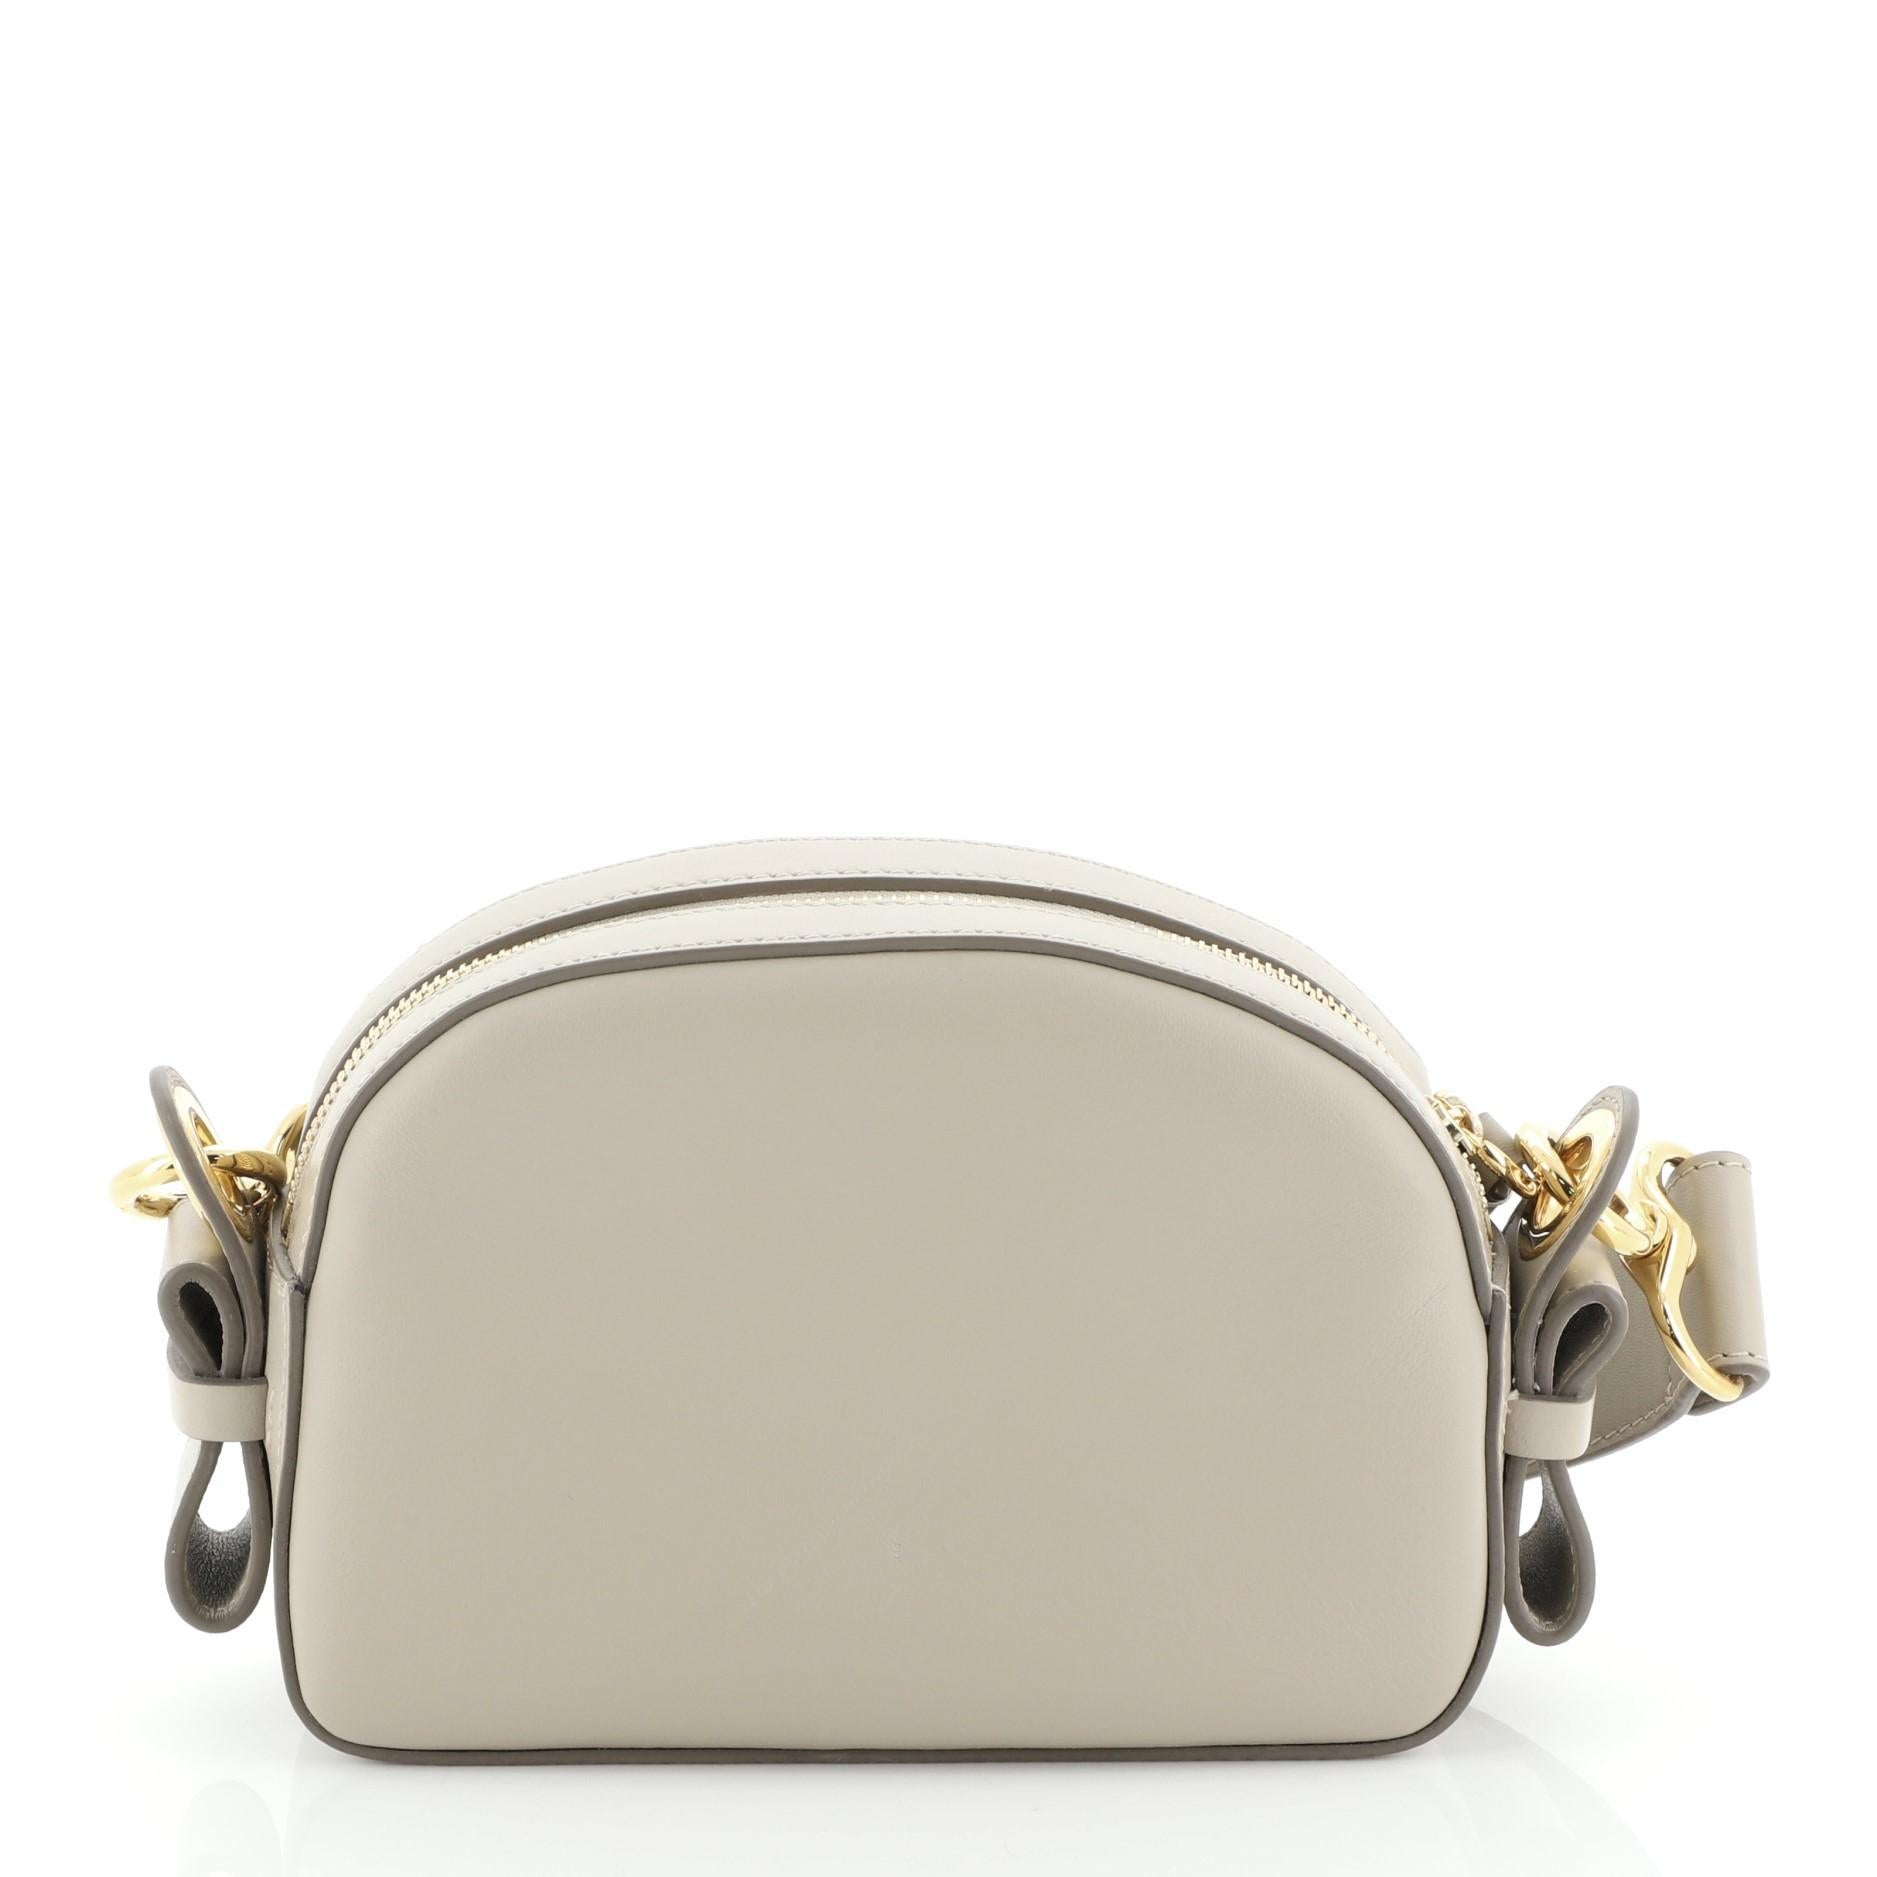 Beige Chloe Dome Shoulder Bag Studded Embroidered Leather Small